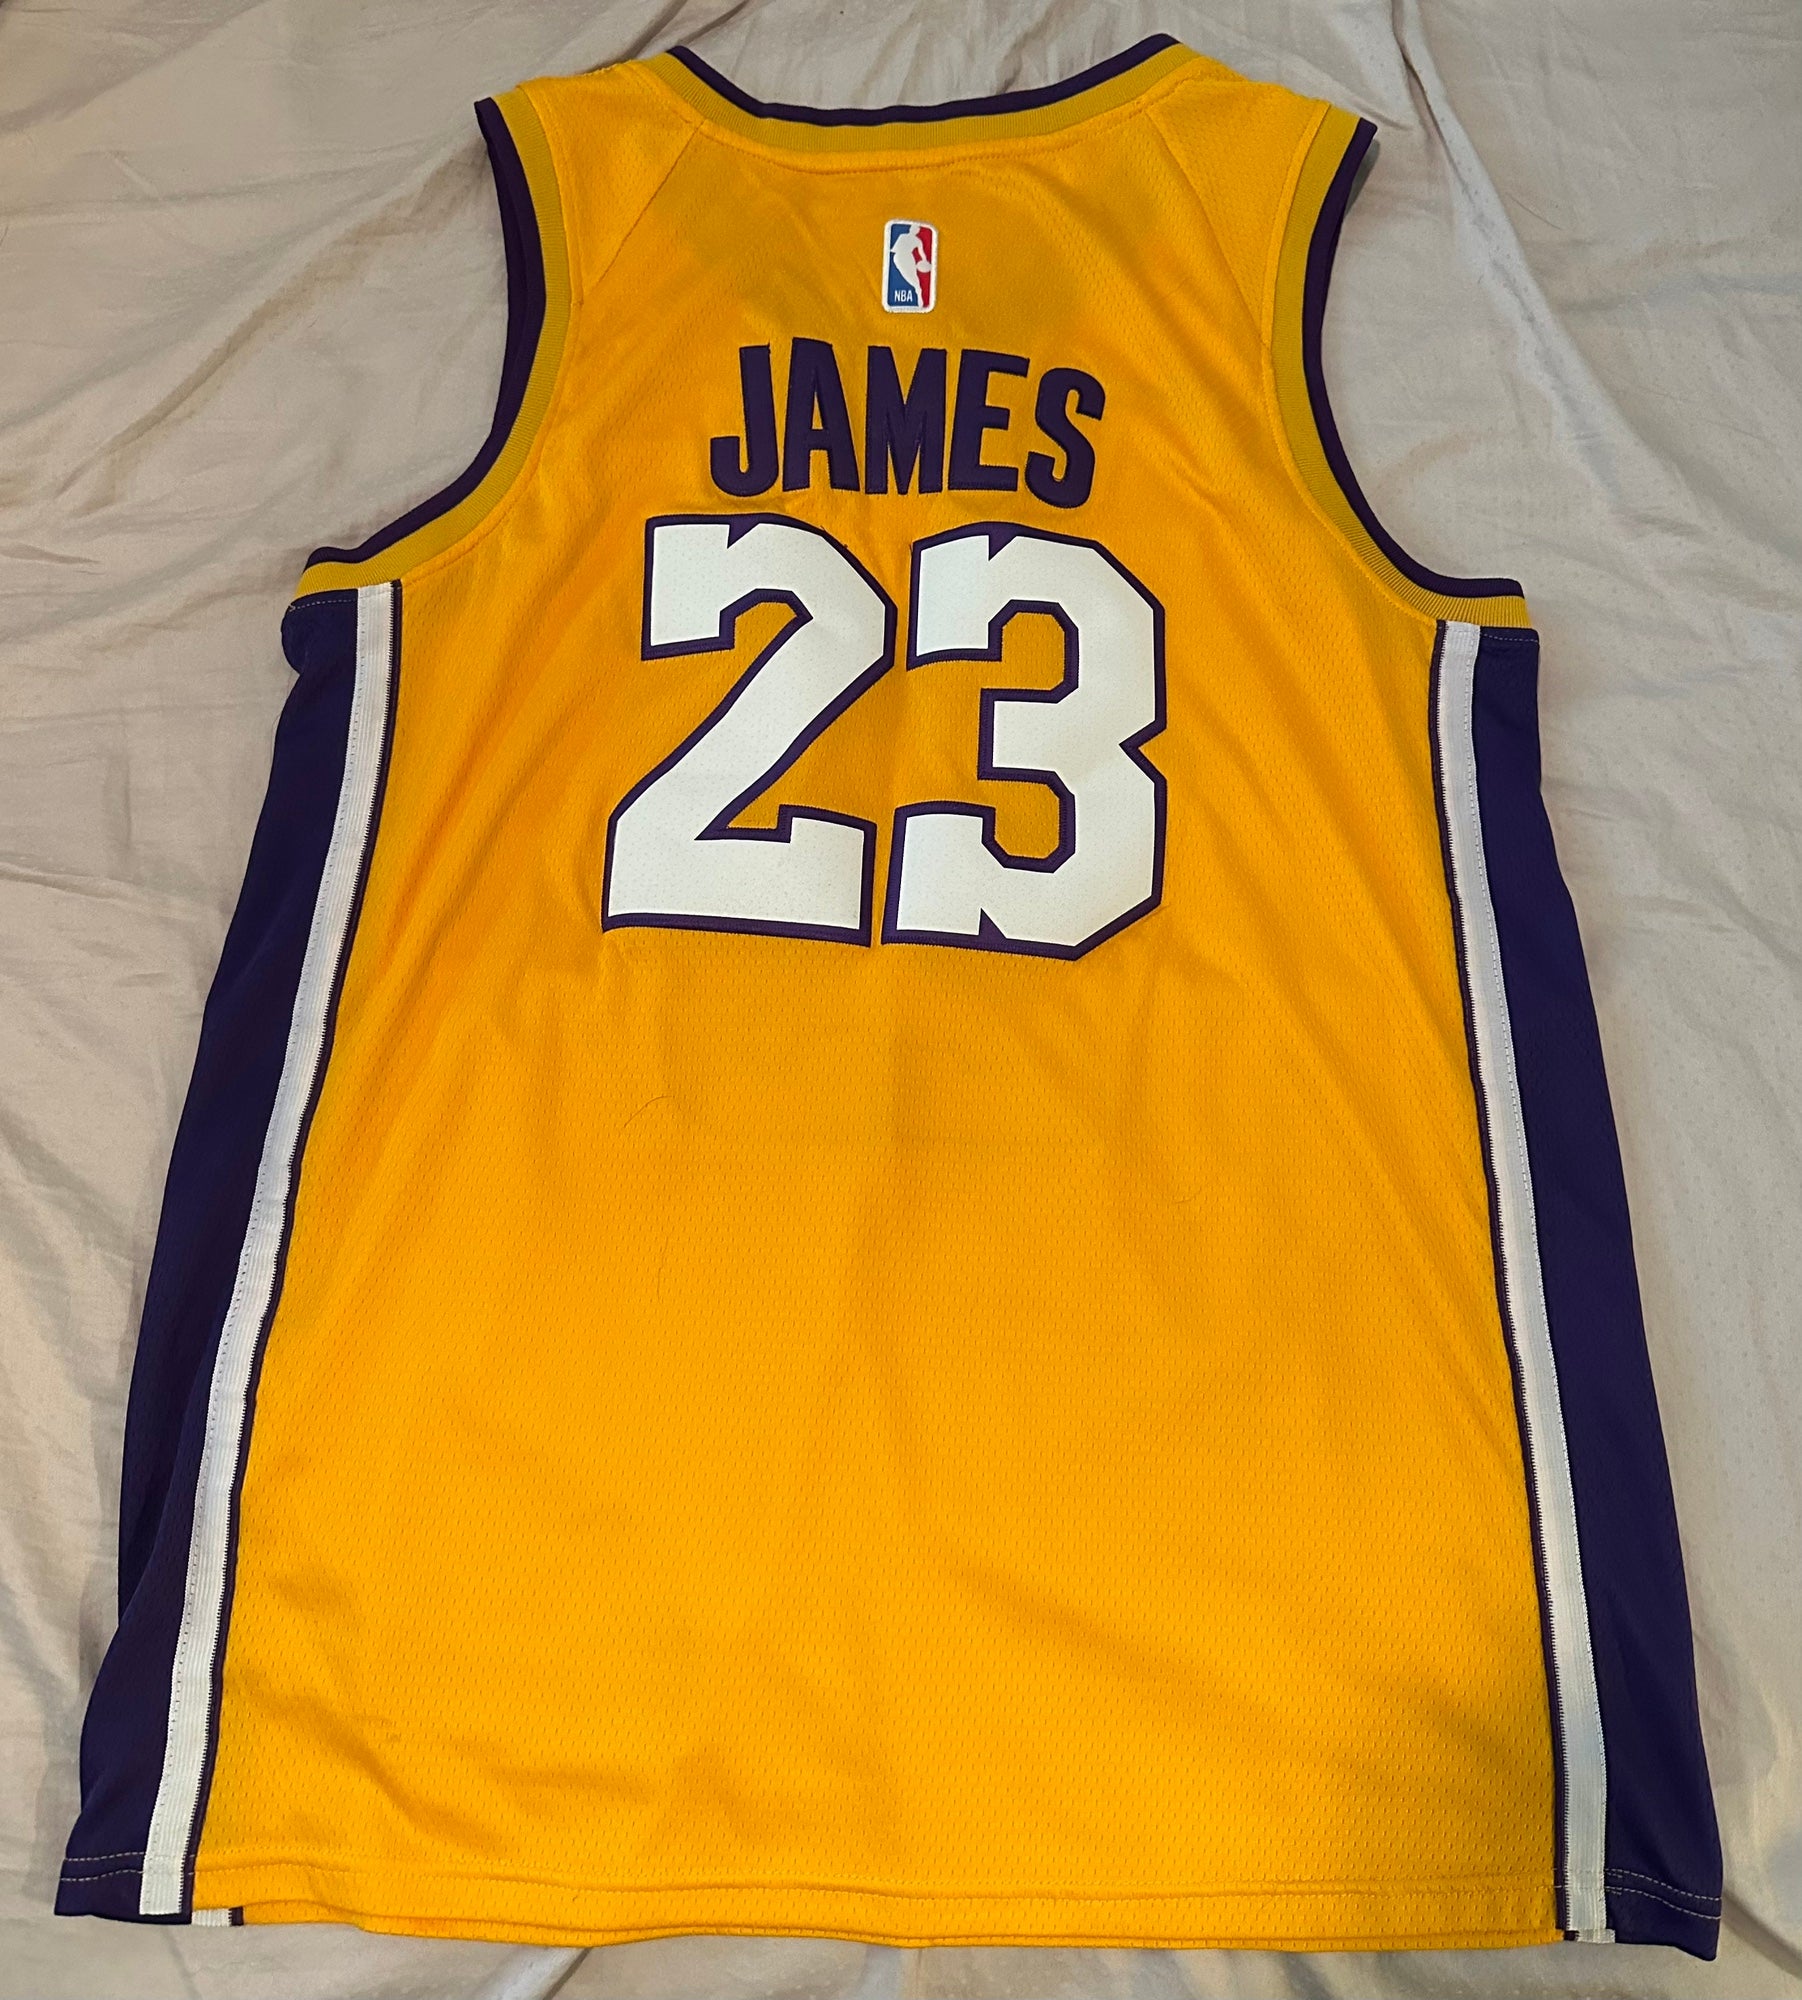 BRAND NEW! LeBron James #23 Los Angeles Nike “MPLS Edition” NBA Jersey -  Size X-Large (XL) Meet Now or Ships Same Day! for Sale in Saint Paul, MN -  OfferUp